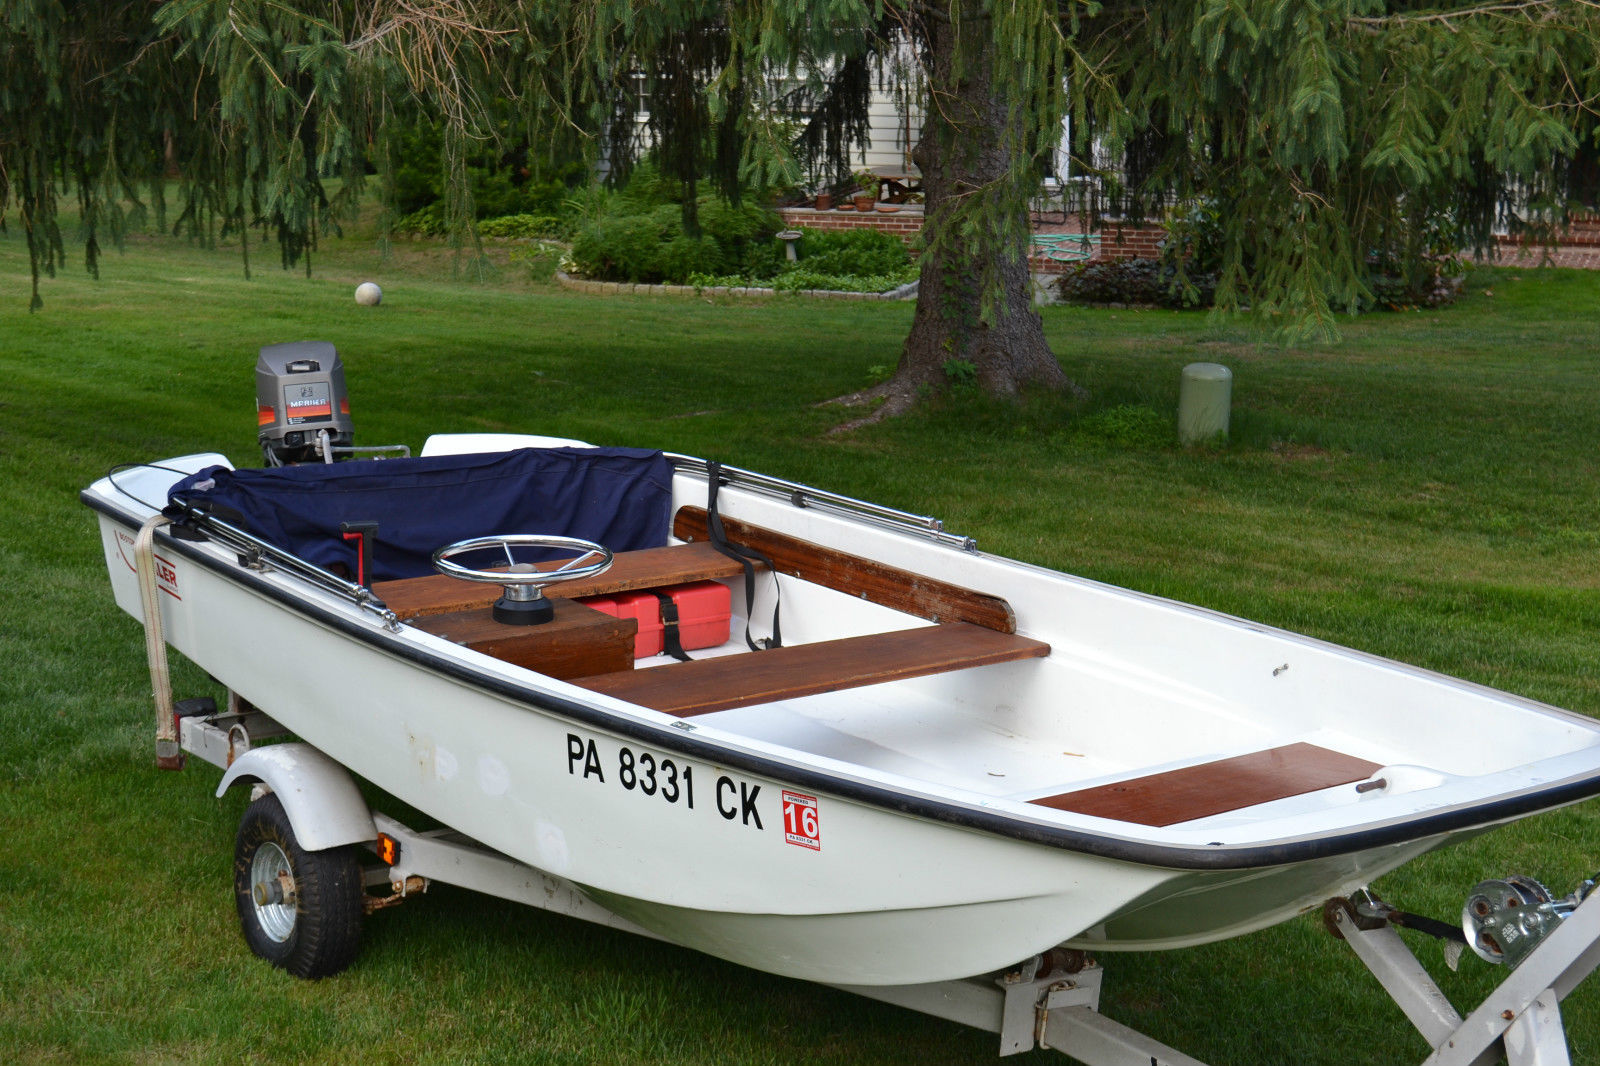 Boston Whaler 13 Foot 1961 for sale for $1,000 - Boats-from-USA.com 13 Foot Boston Whaler Trailer For Sale